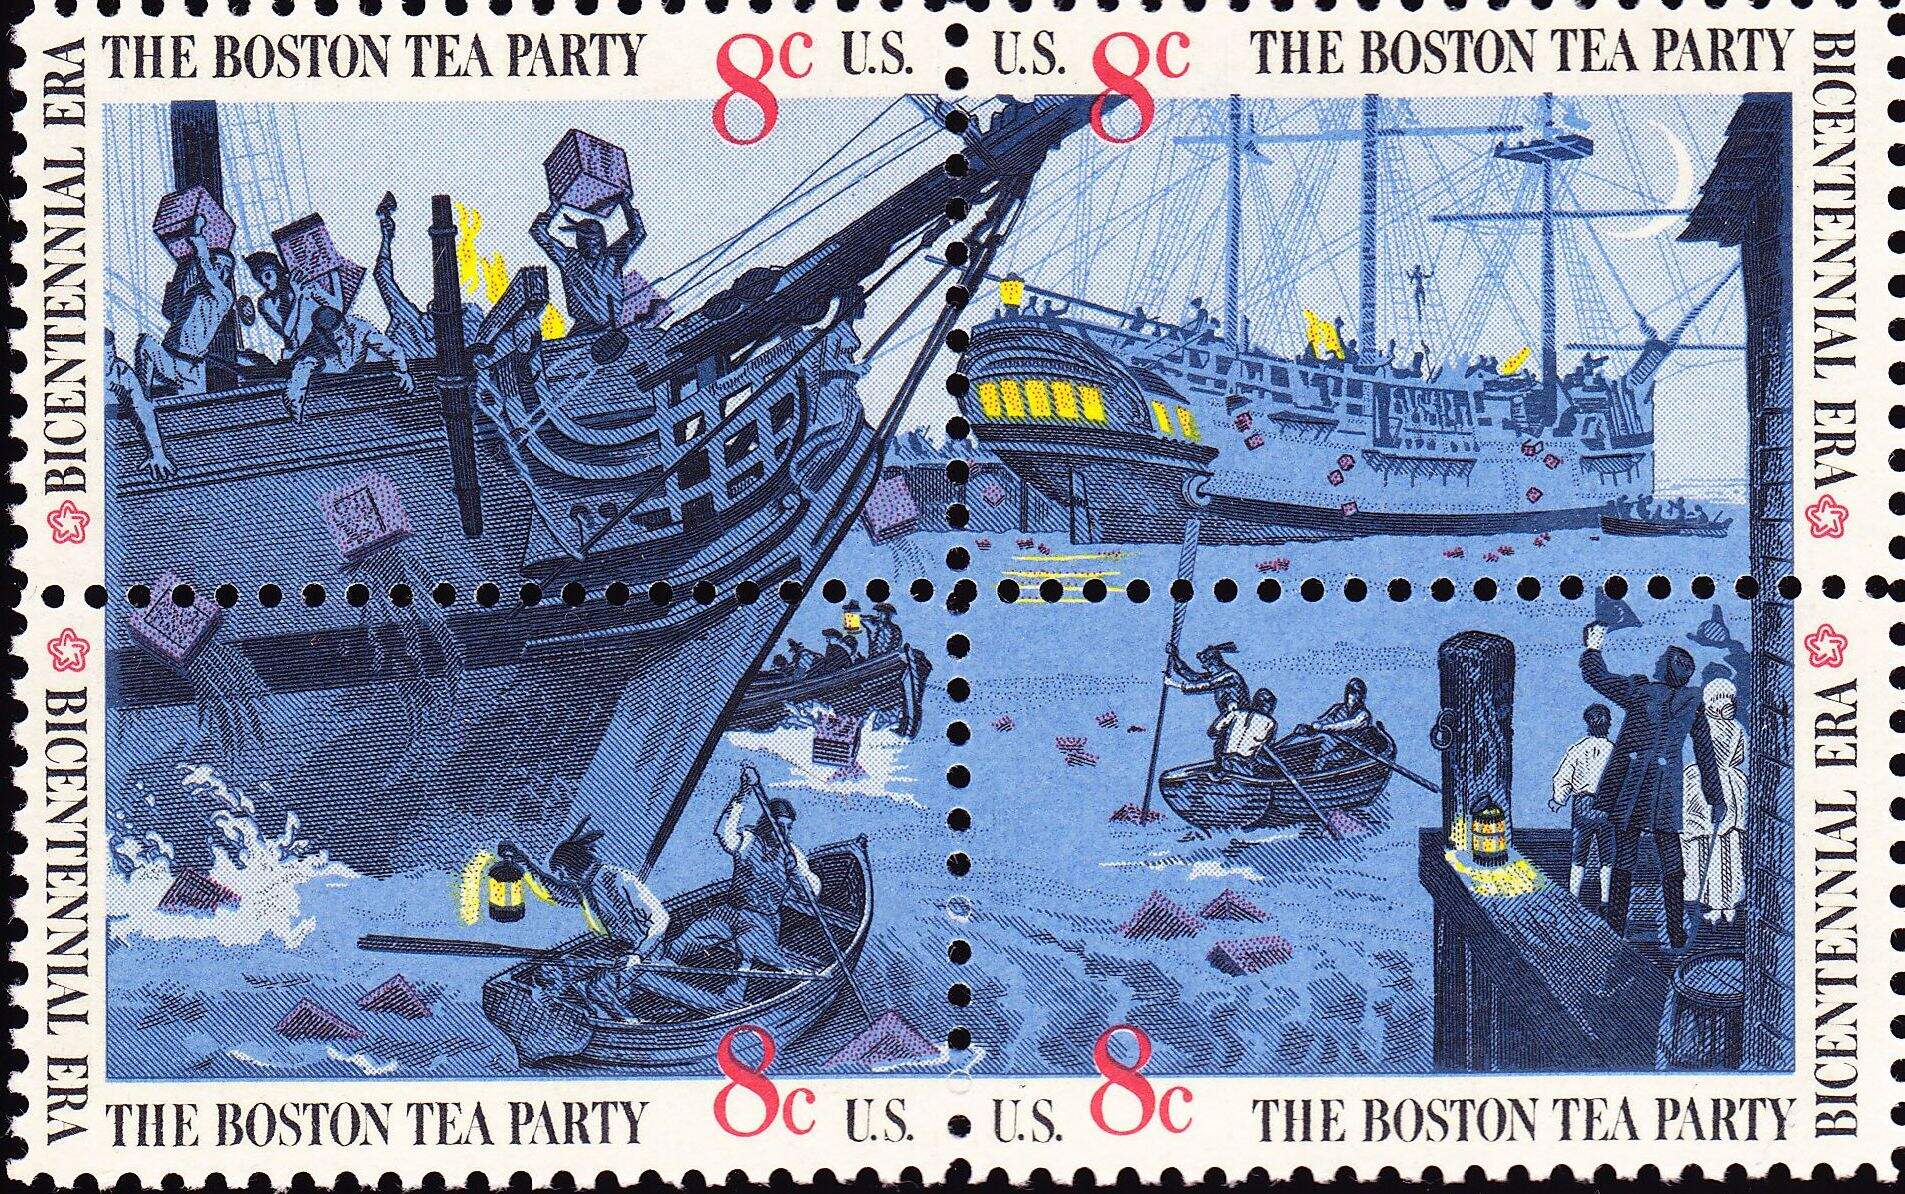 A 1973 stamp celebrating the 200th anniversary of the Boston Tea Party included some historical inaccuracies, like the depth of the water and feathers worn by colonists. (United States Postal Service)